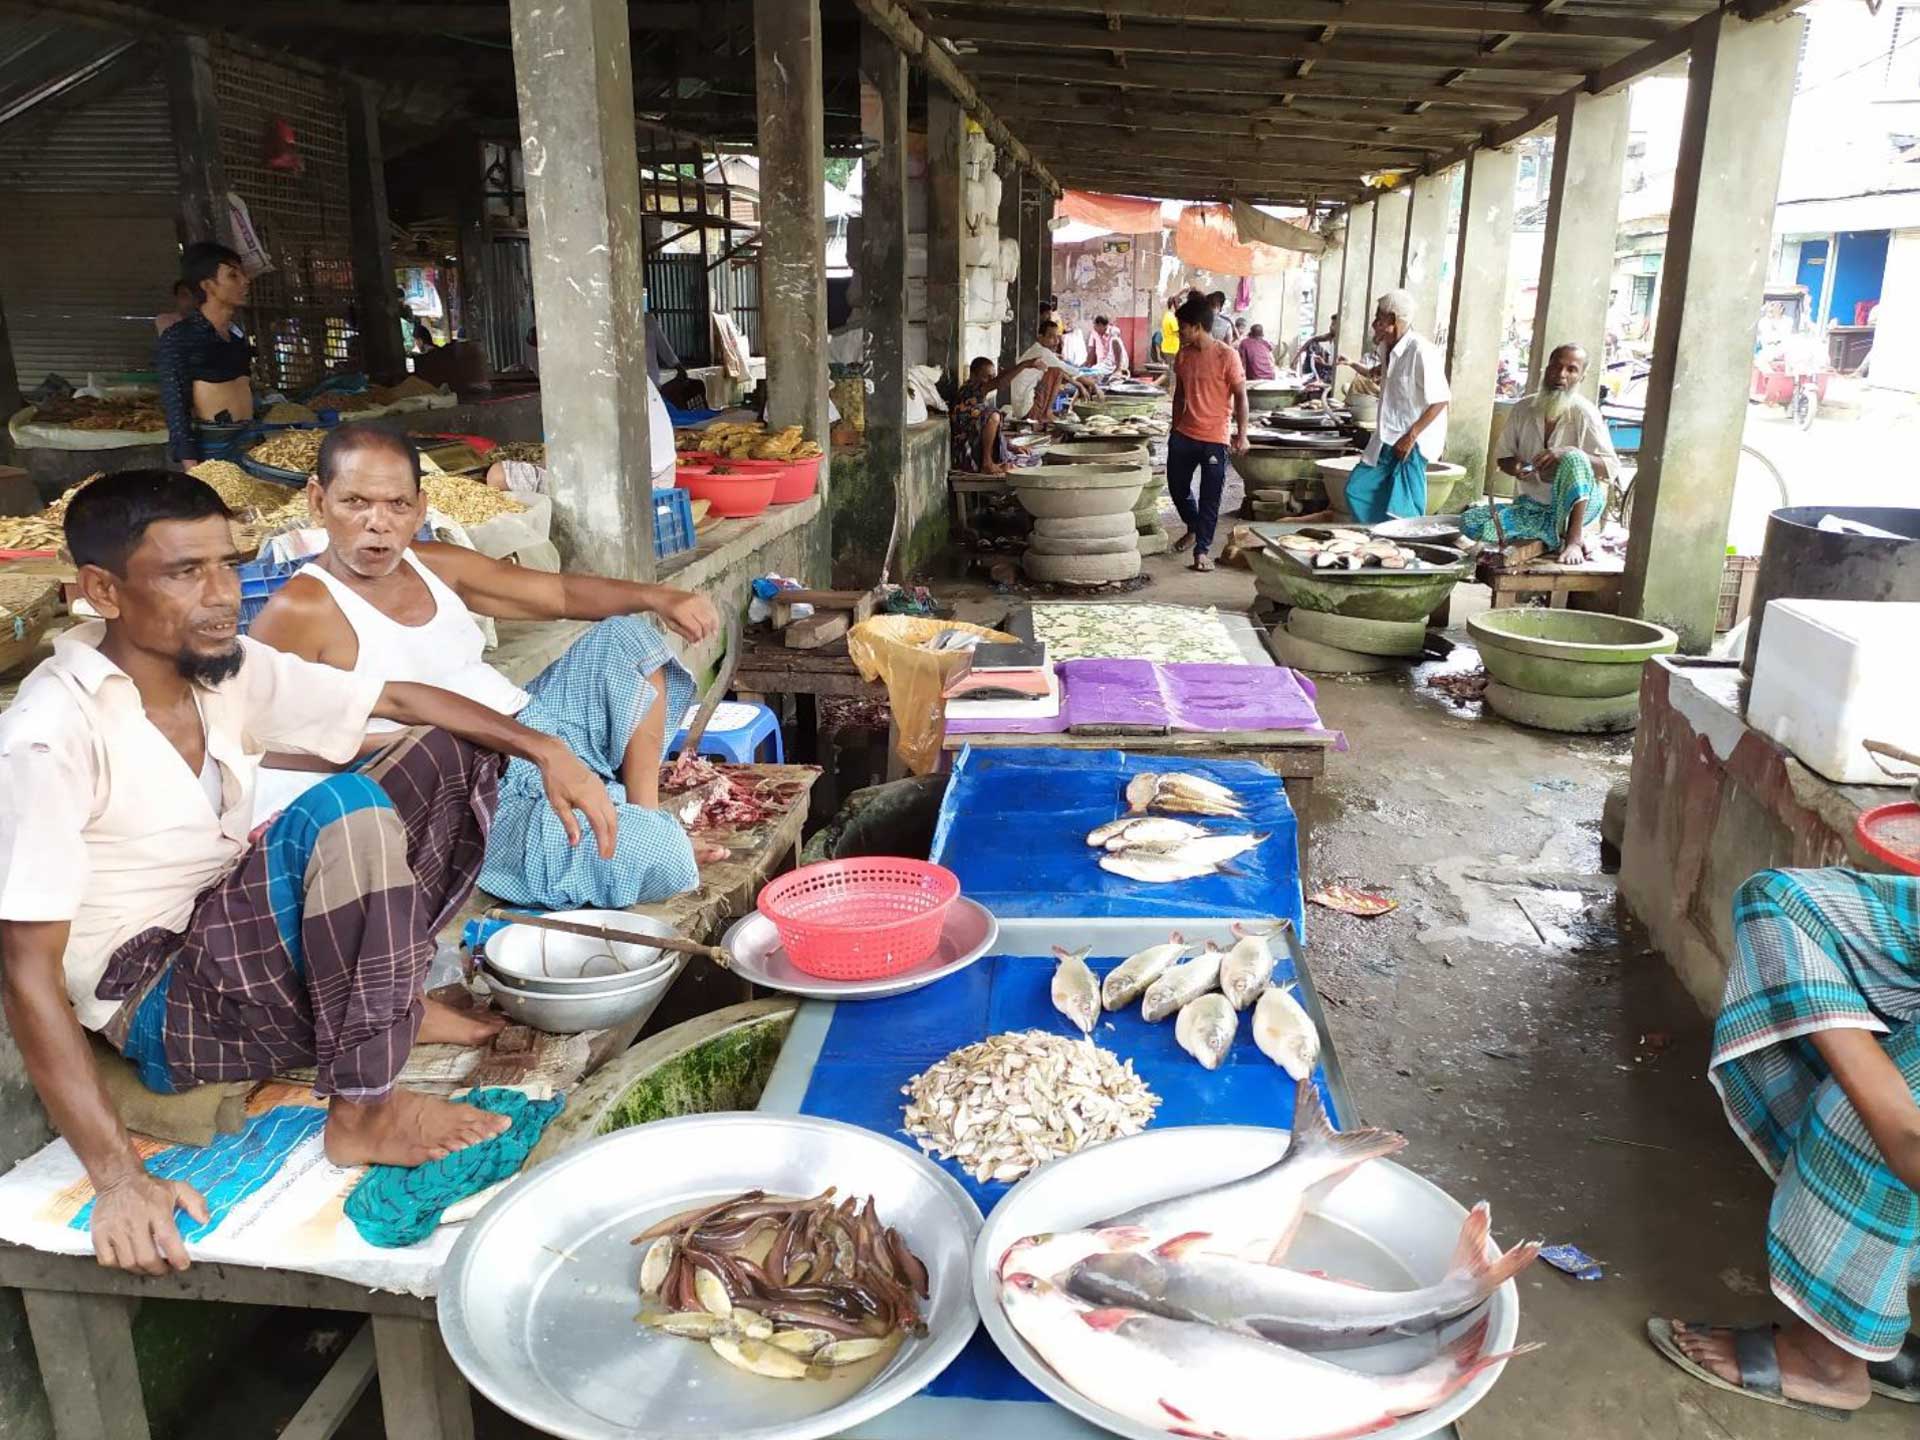 Small quantities of fish on sale, few customers present, and little PPE being worn at retail market in Muktagacha town, Mymensingh (August 8, 2020) - Photo: M. Mahfujul Haque. 